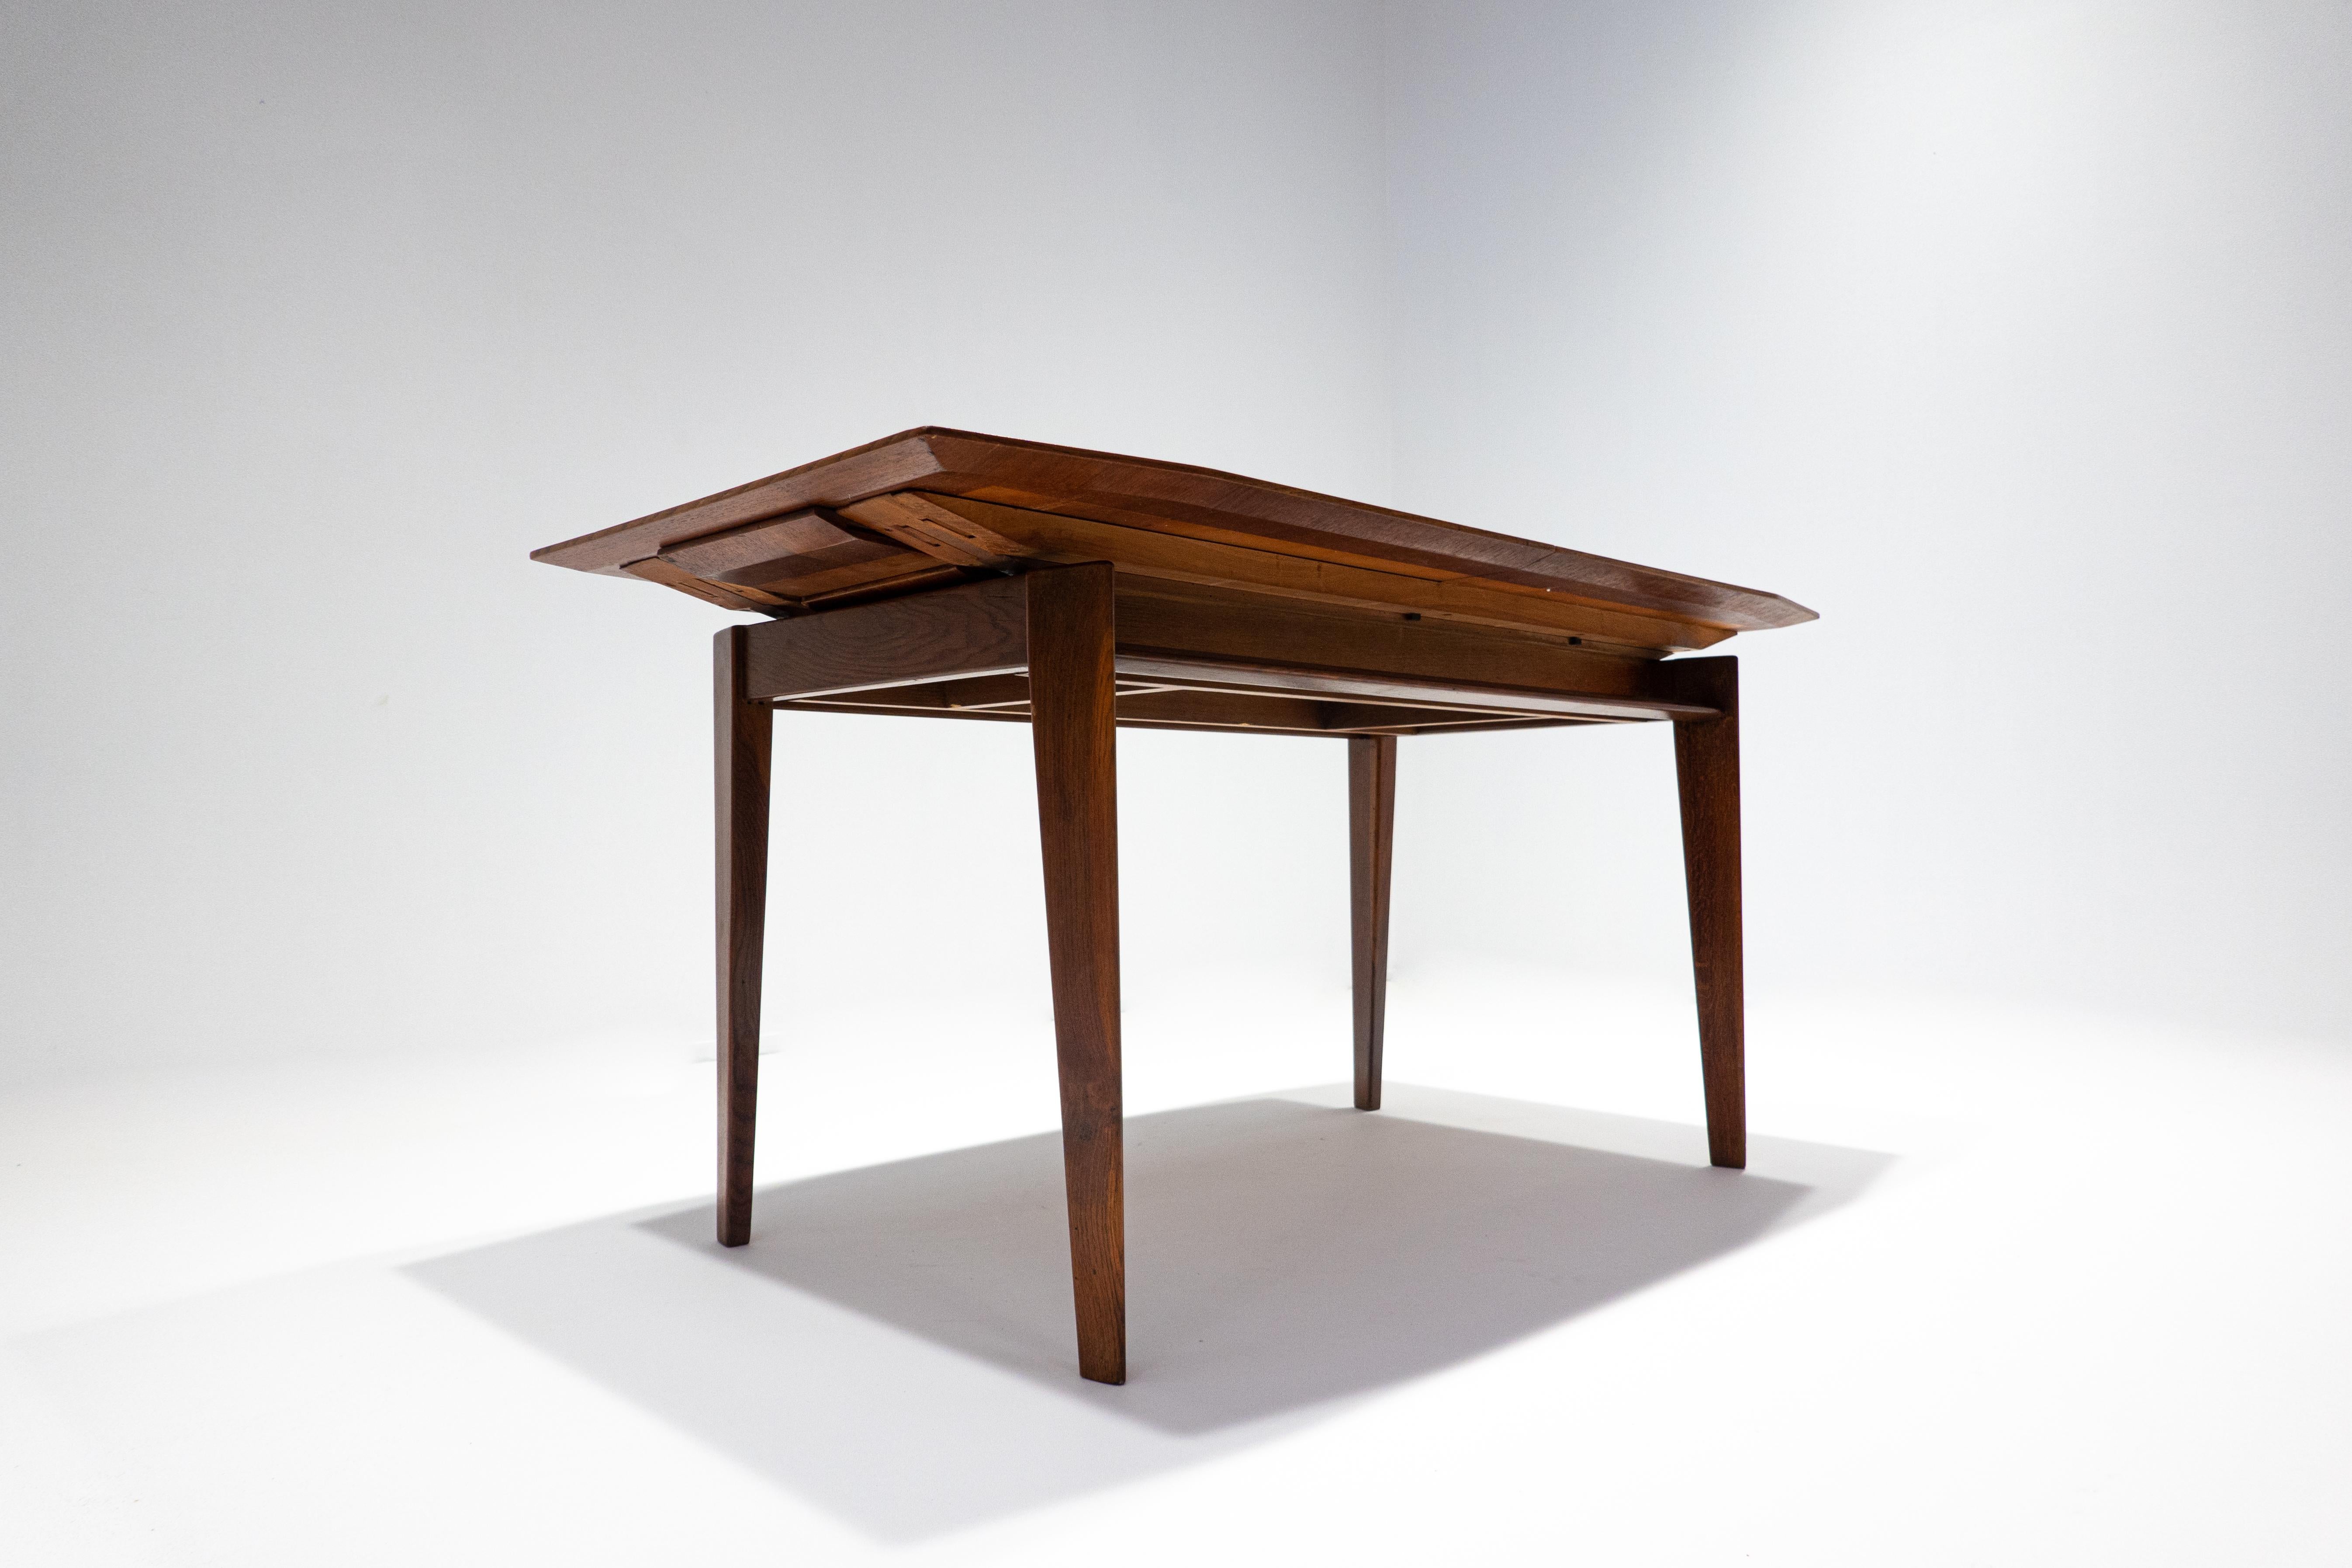 Italian Mid-Century Modern Extendable Dining Table by Vittorio Dassi, Teak, Italy, 1950s For Sale